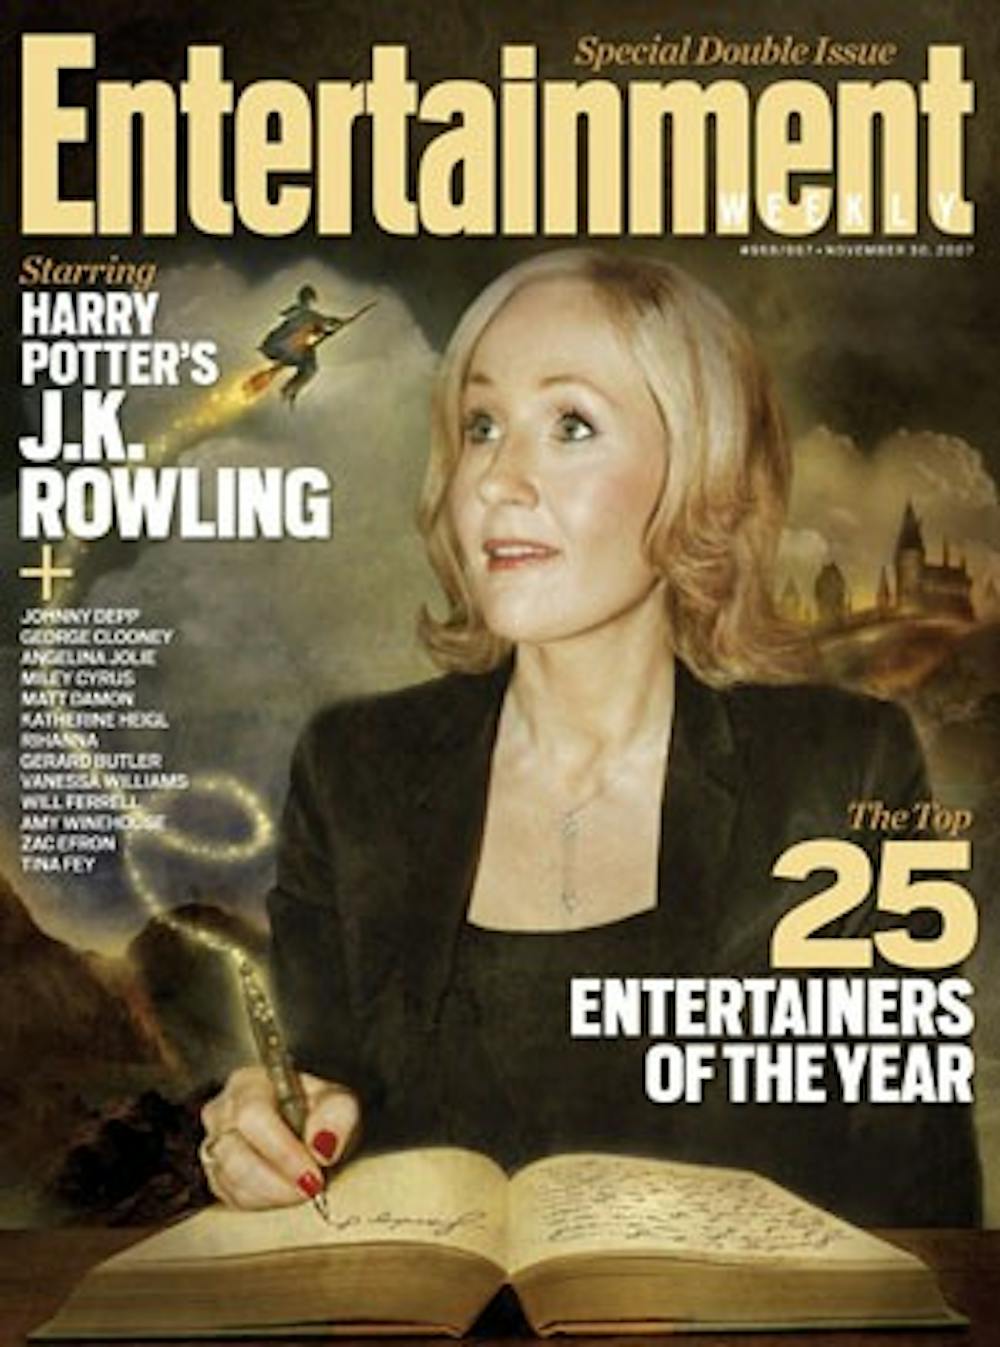 People Rowling Entertainer Of The Year